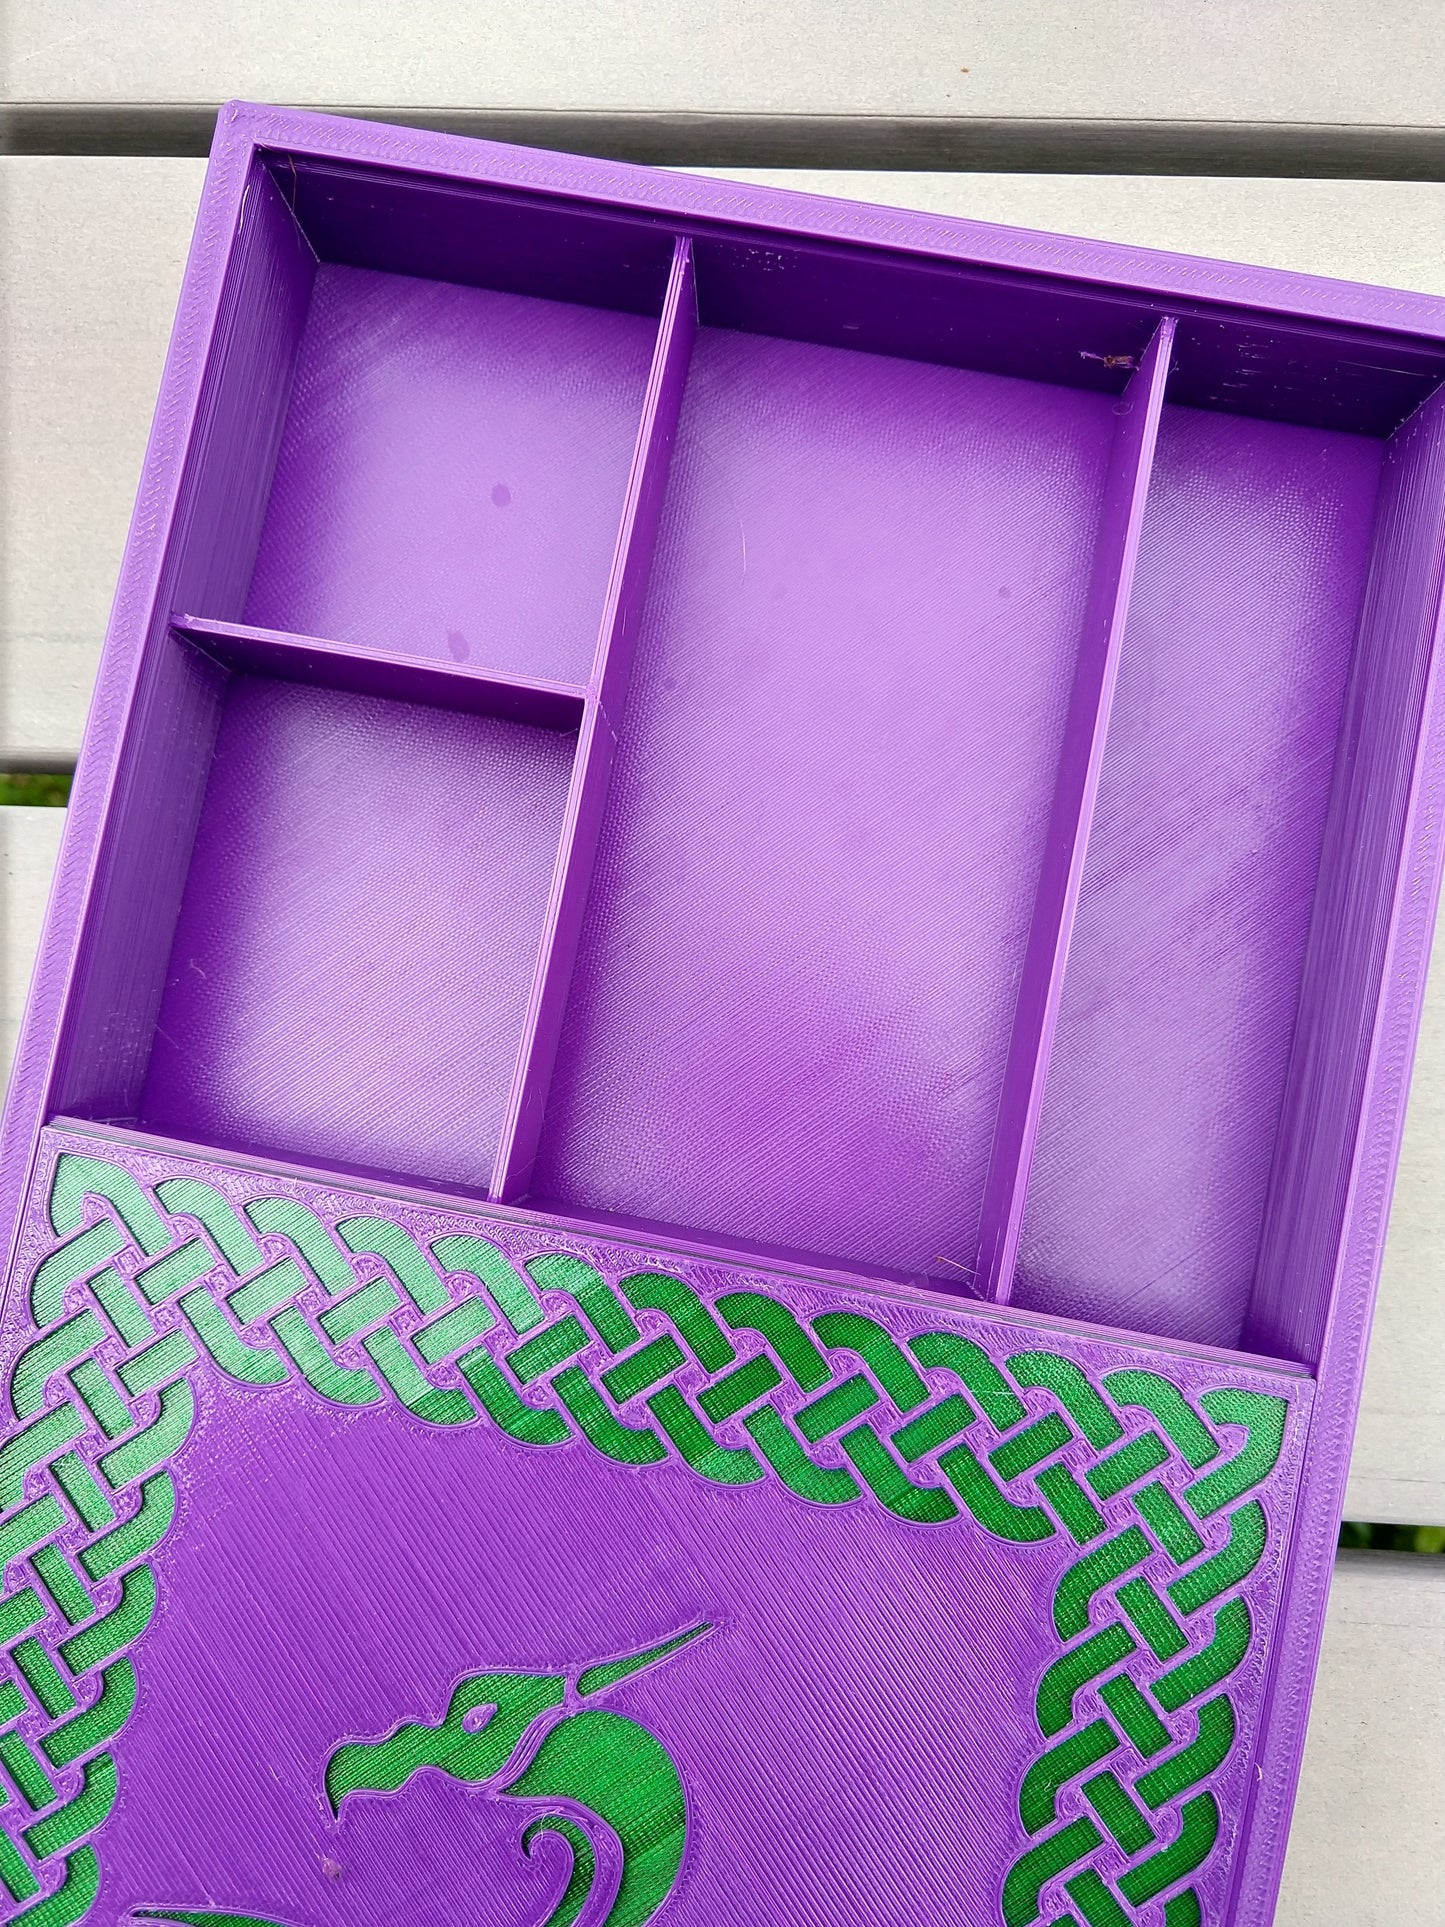 3D printed Notions Box--Floral Cat